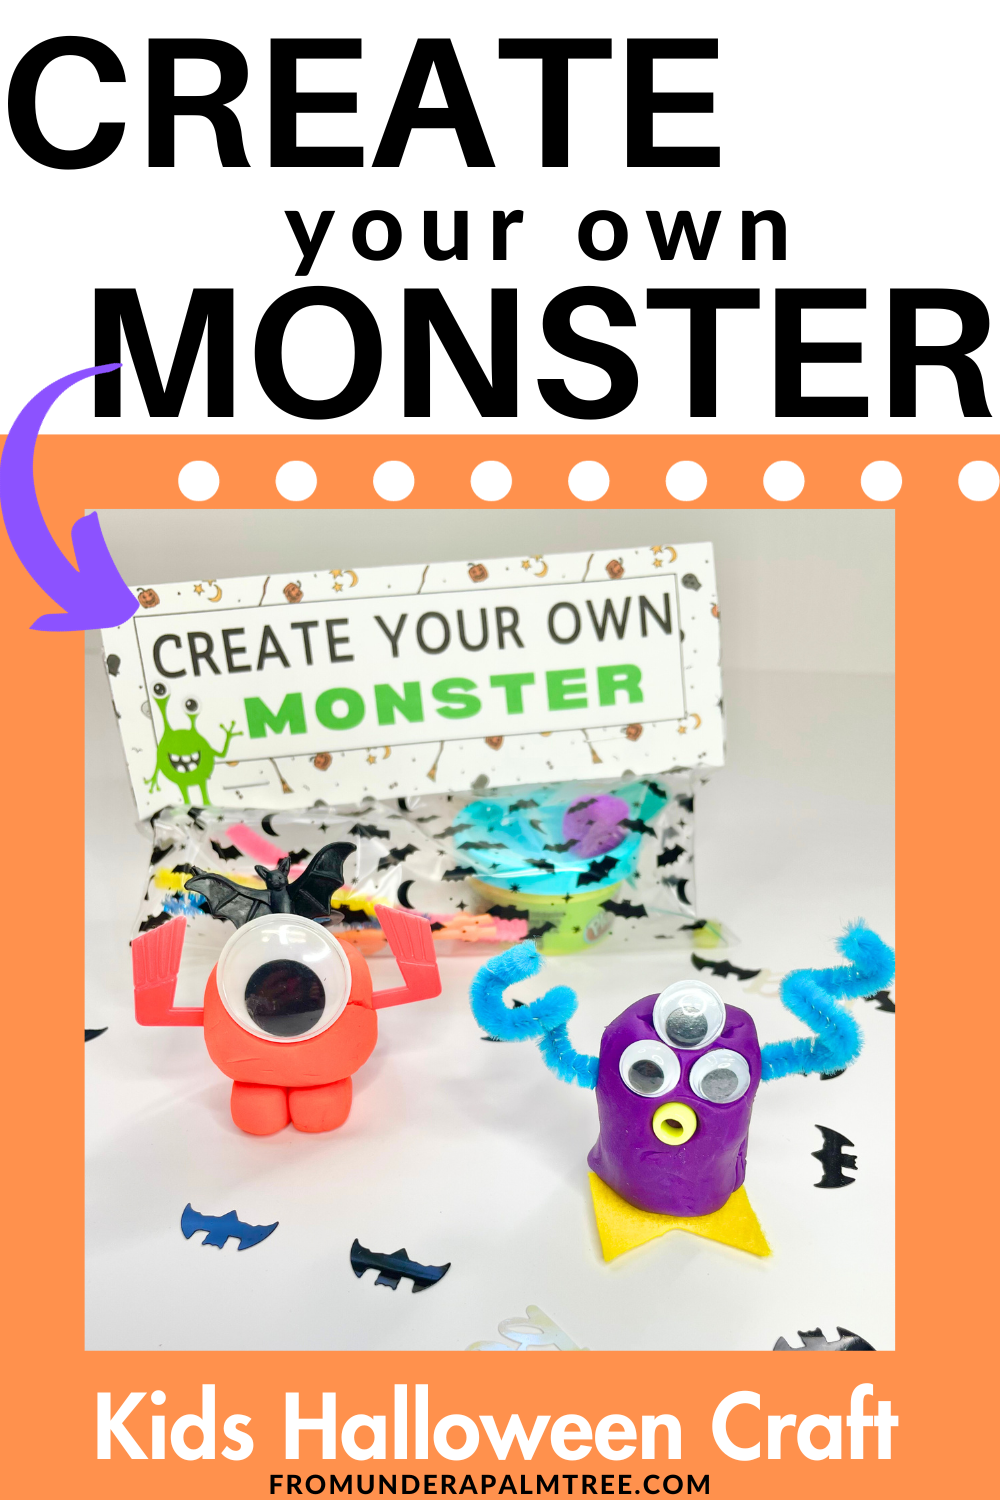 create your own monster | create your own play doh monster treat bags | play doh monster treat bags | halloween treat bags | halloween crafts | halloween kids craft | halloween party favor | trick or treat favor | DIY trick or treat favor | kids halloween party favor | classroom halloween party | school halloween party craft | preschool halloween craft | kindergarten halloween craft | first grade halloween craft | second grade halloween craft | DIY halloween treat bags | halloween treat bags | 